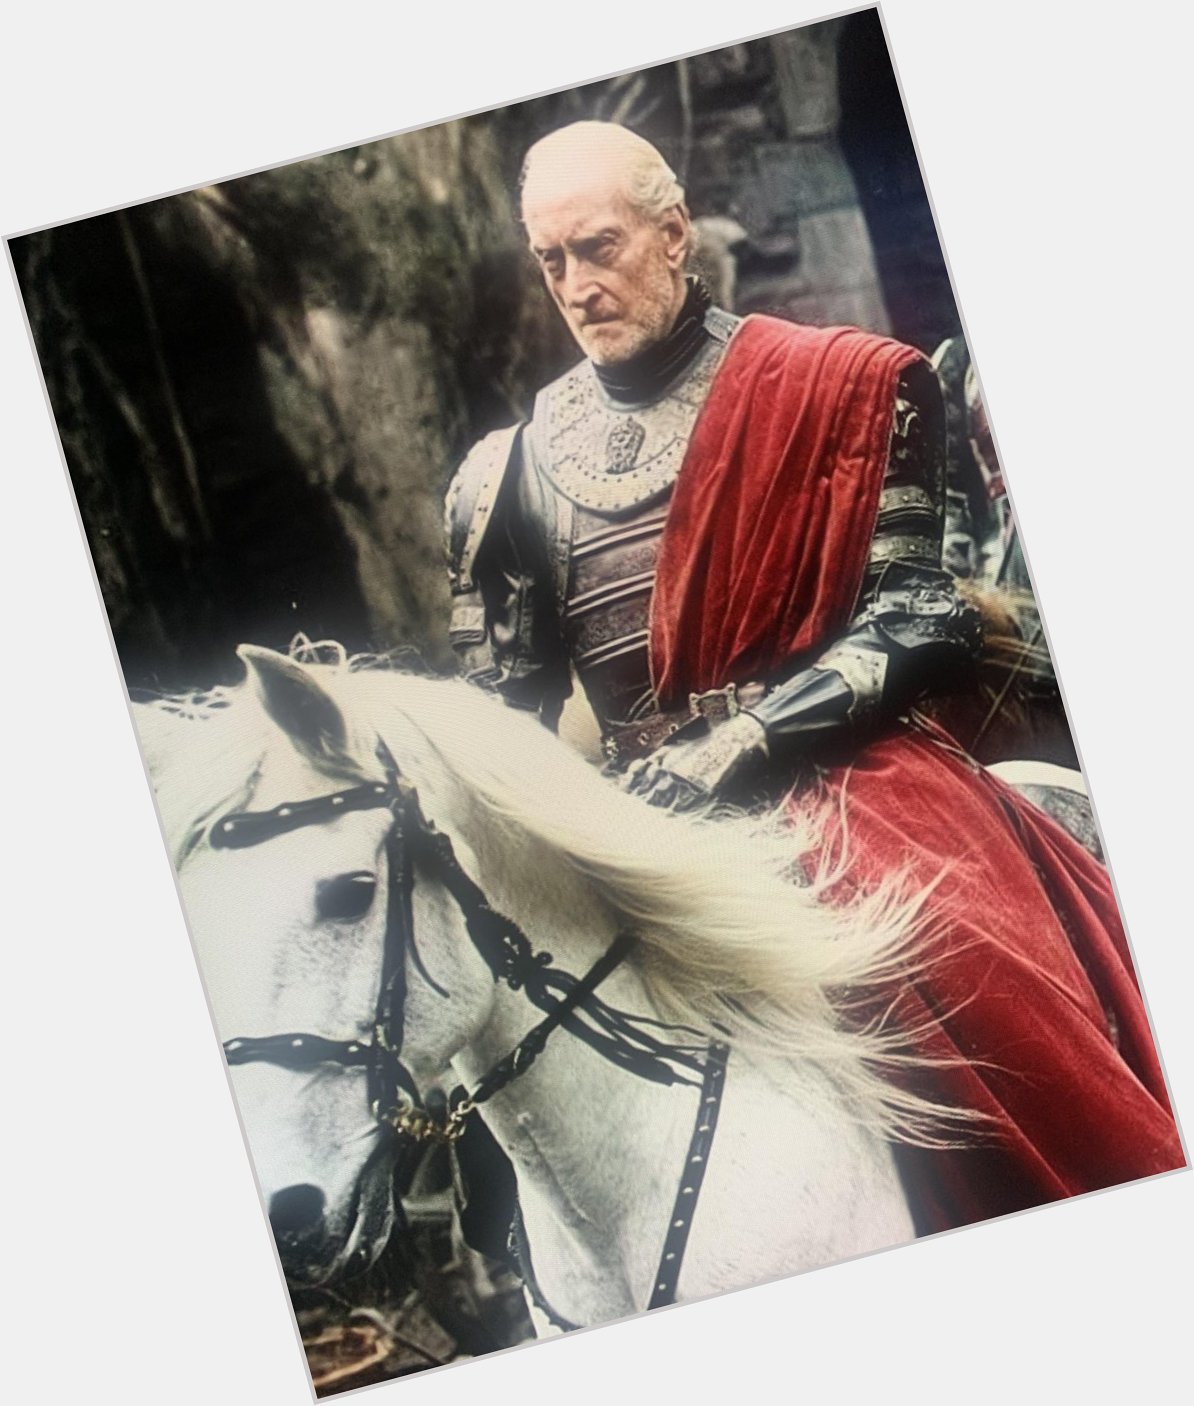 Happy birthday Charles dance the one and only Tywin Lannister !  